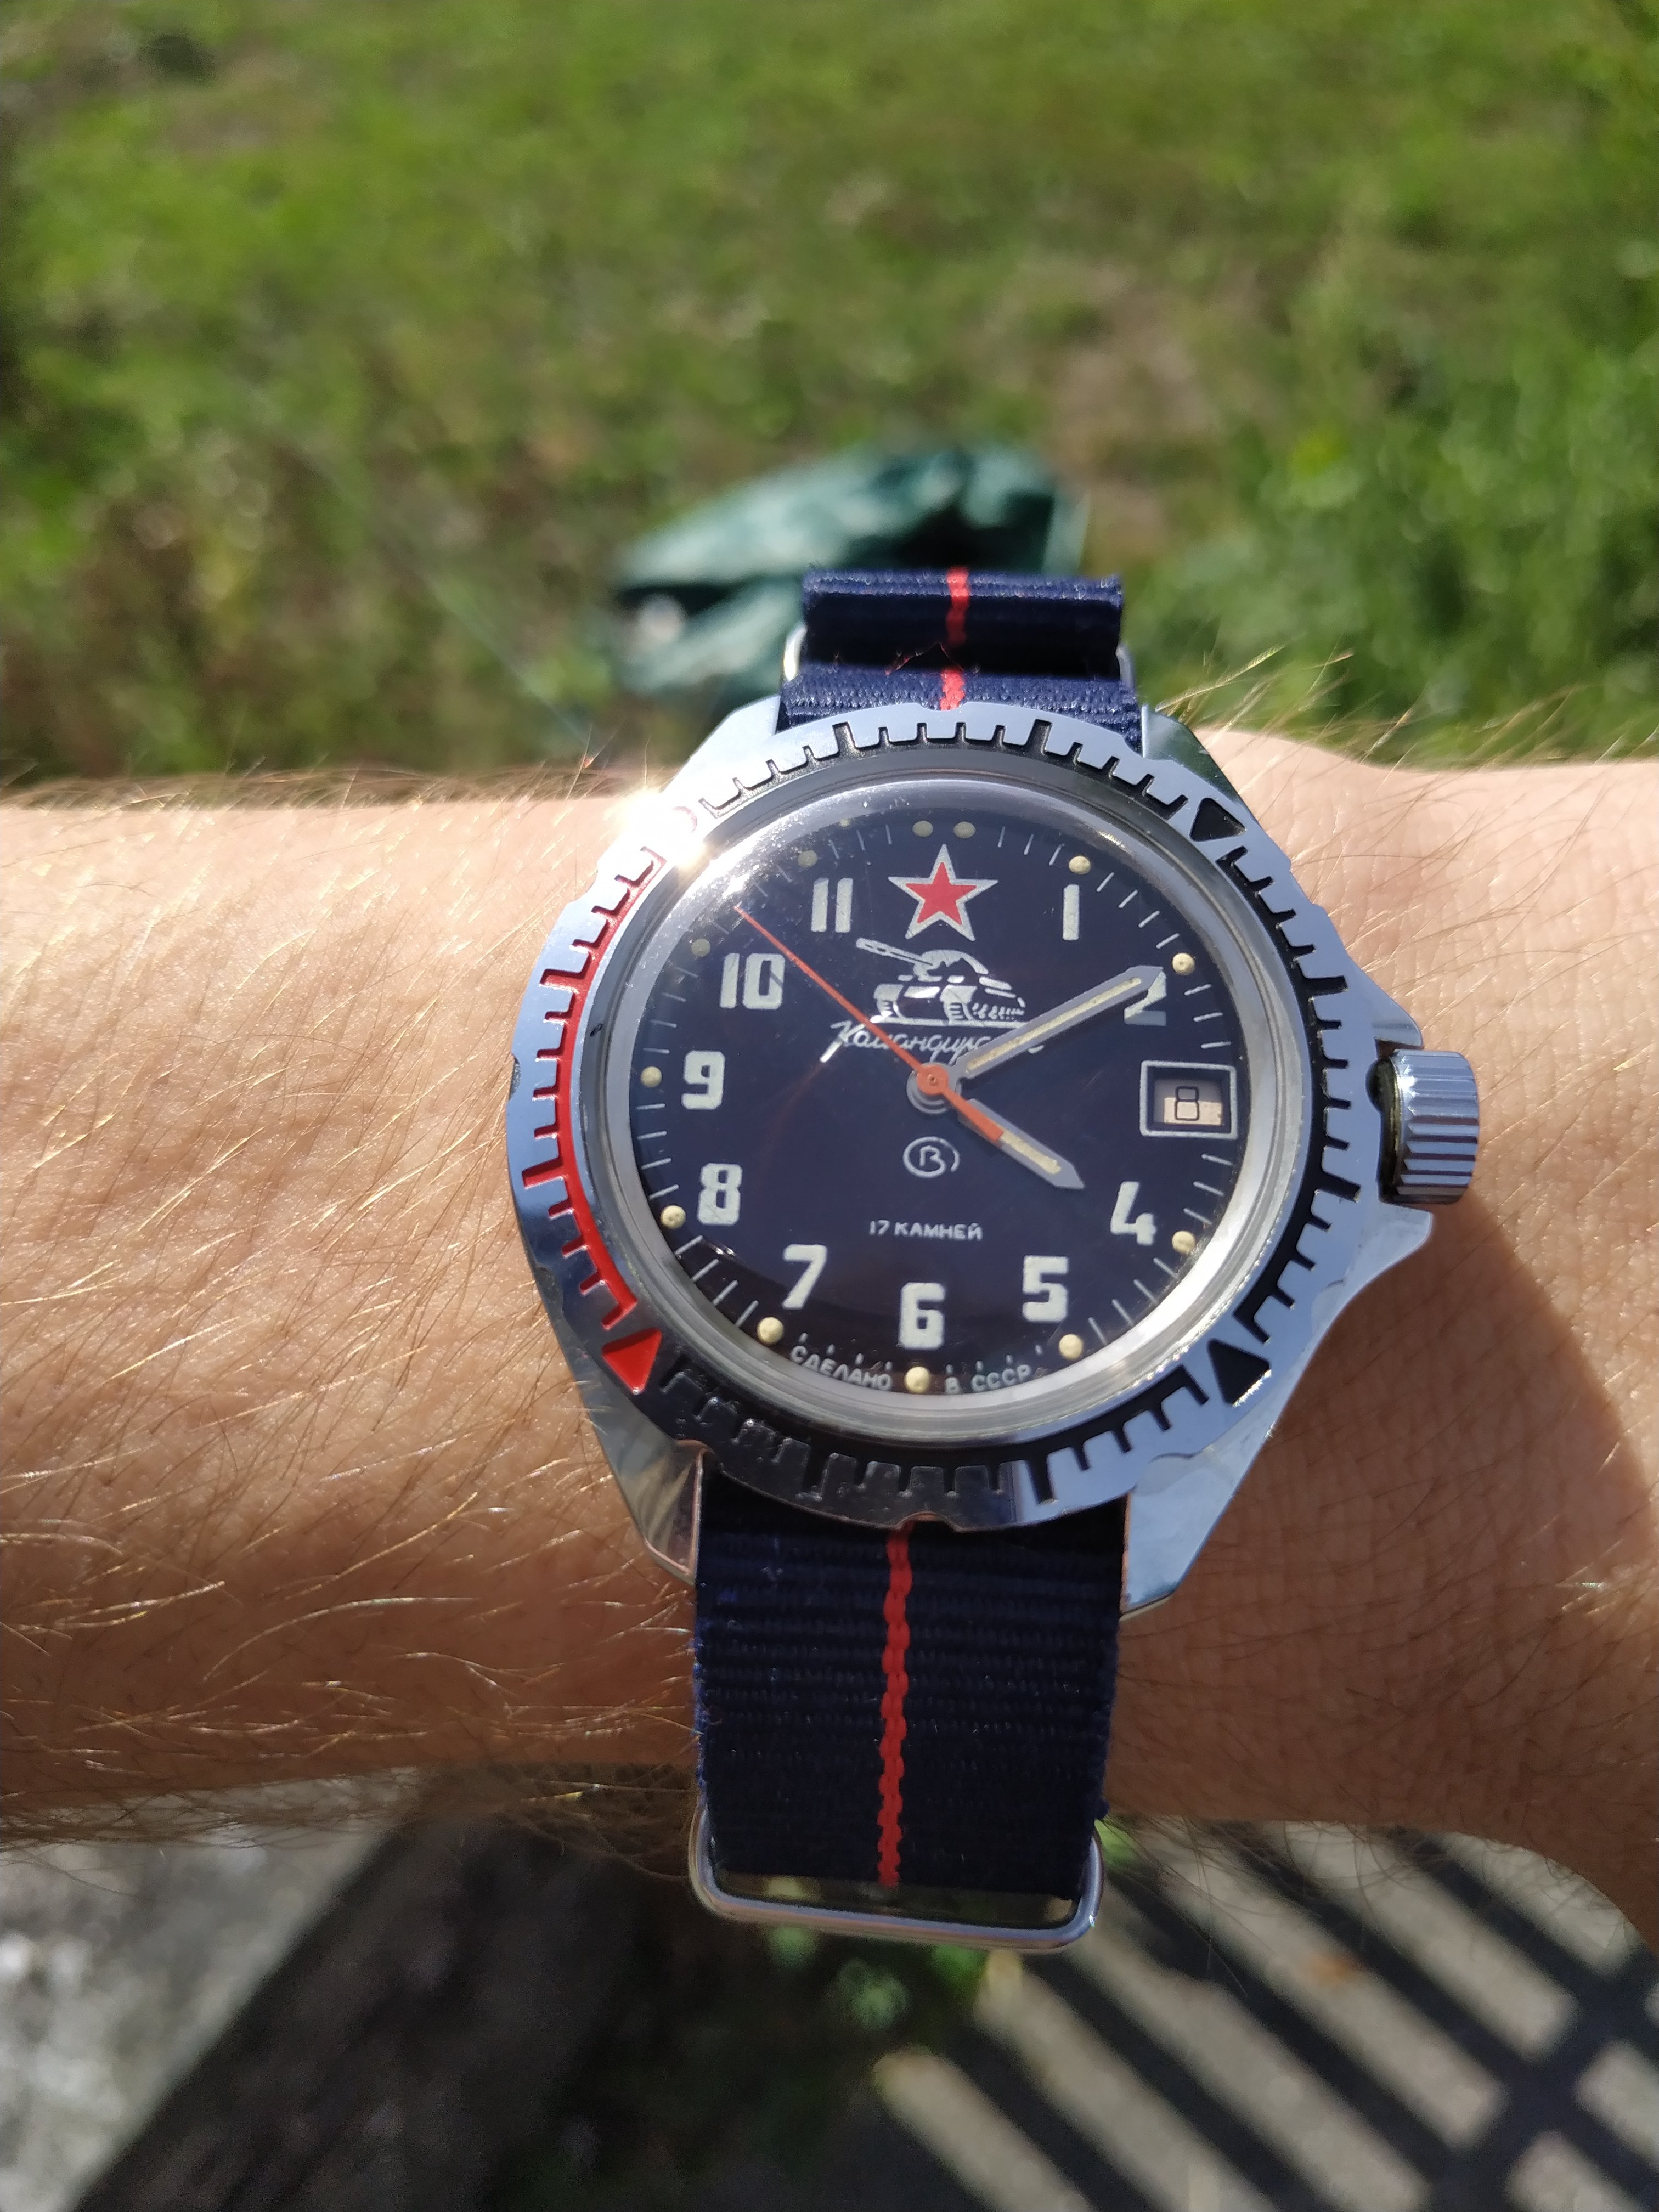 What will happen to the SKX013? | Omega Forums